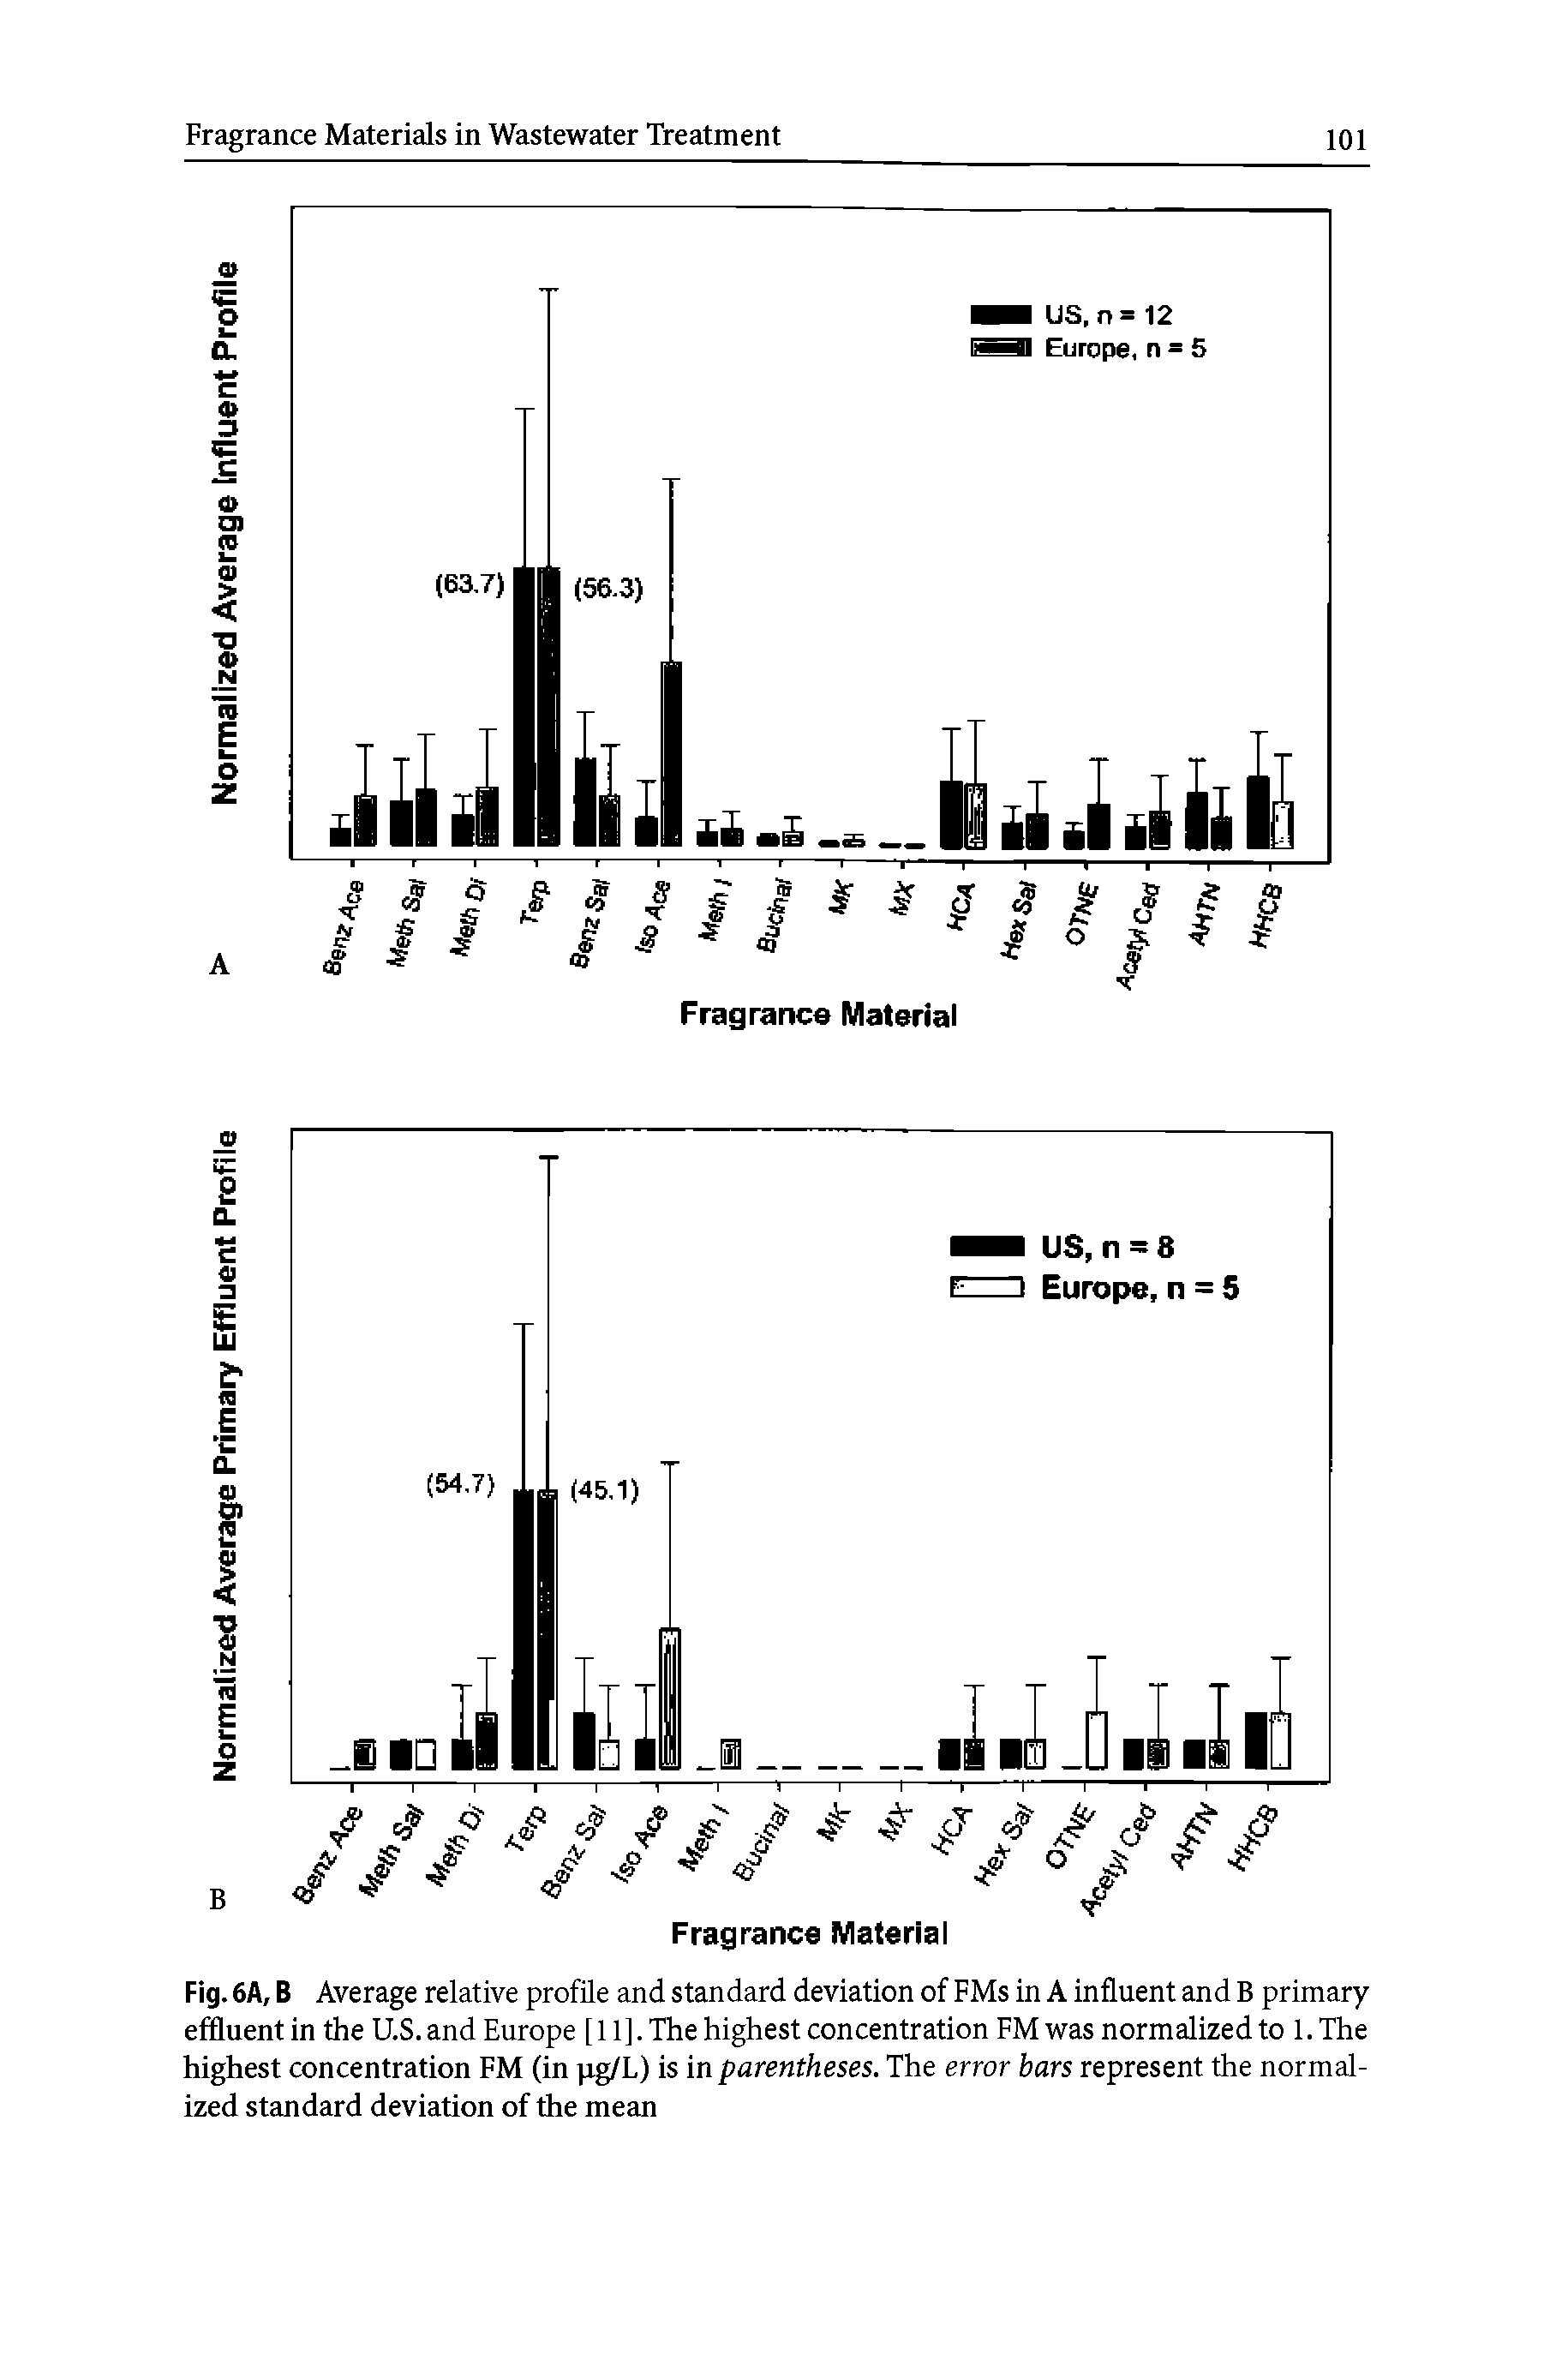 Fig. 6A, B Average relative profile and standard deviation of FMs in A influent and B primary effluent in the U.S. and Europe [11]. The highest concentration FM was normalized to 1. The highest concentration FM (in pg/L) is in parentheses. The error bars represent the normalized standard deviation of the mean...